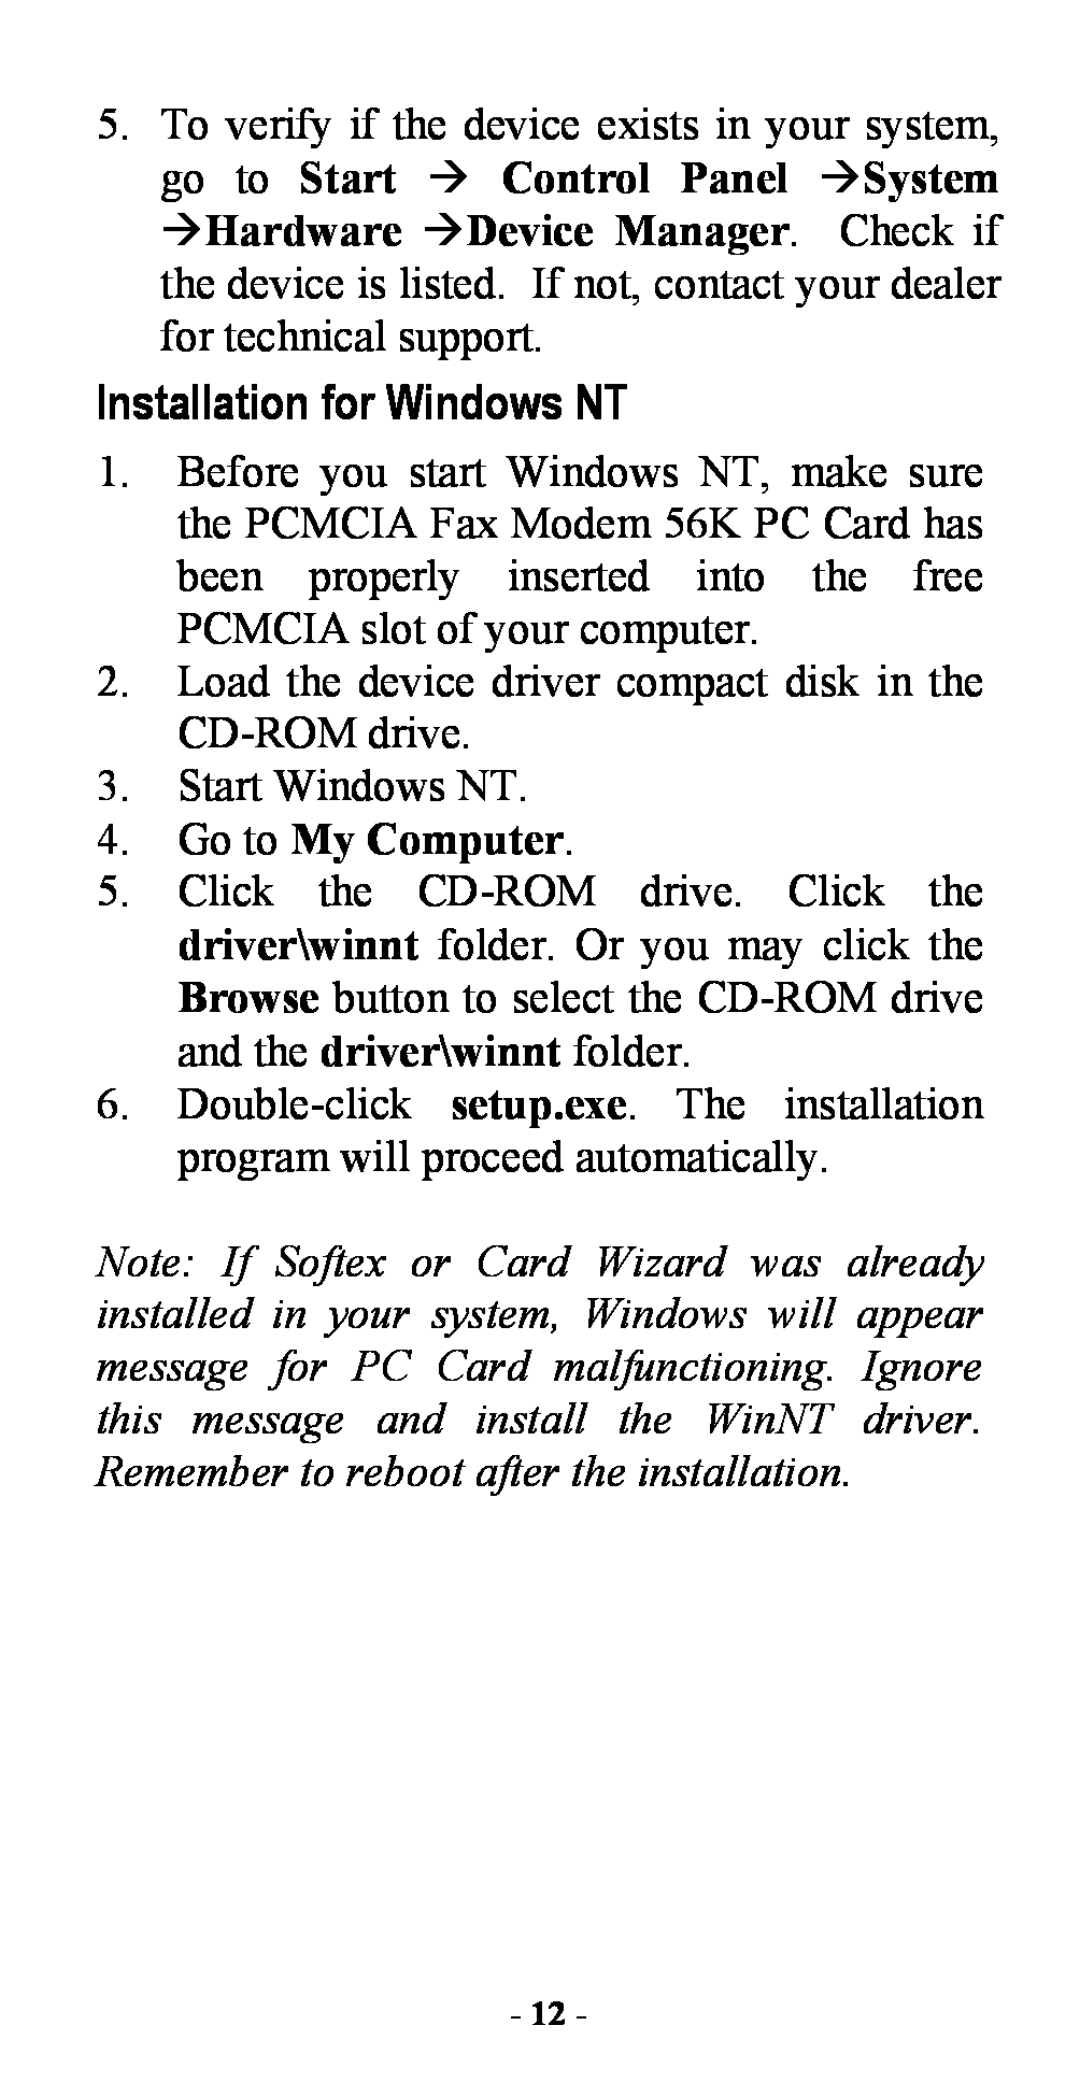 Abocom FM560C manual Installation for Windows NT, Go to My Computer 